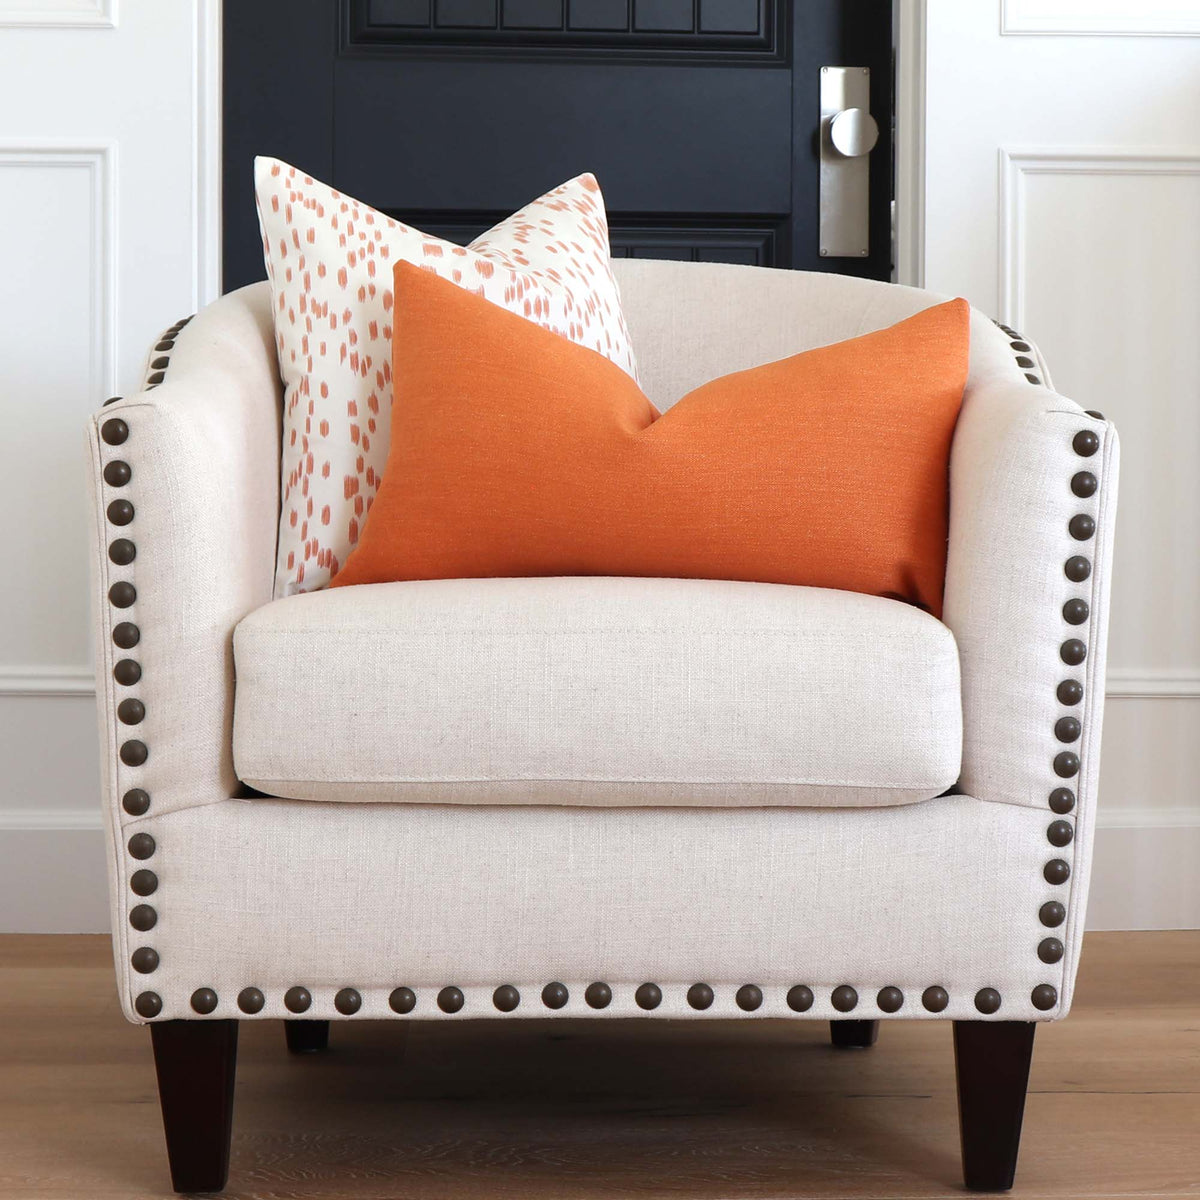 https://www.chloeandolive.com/cdn/shop/products/Tay-Pumpkin-Orange-Solid-Linen-Decorative-Throw-Pillow-Cover-on-Accent-Chair-in-Home-Decor_1200x.jpg?v=1651120237